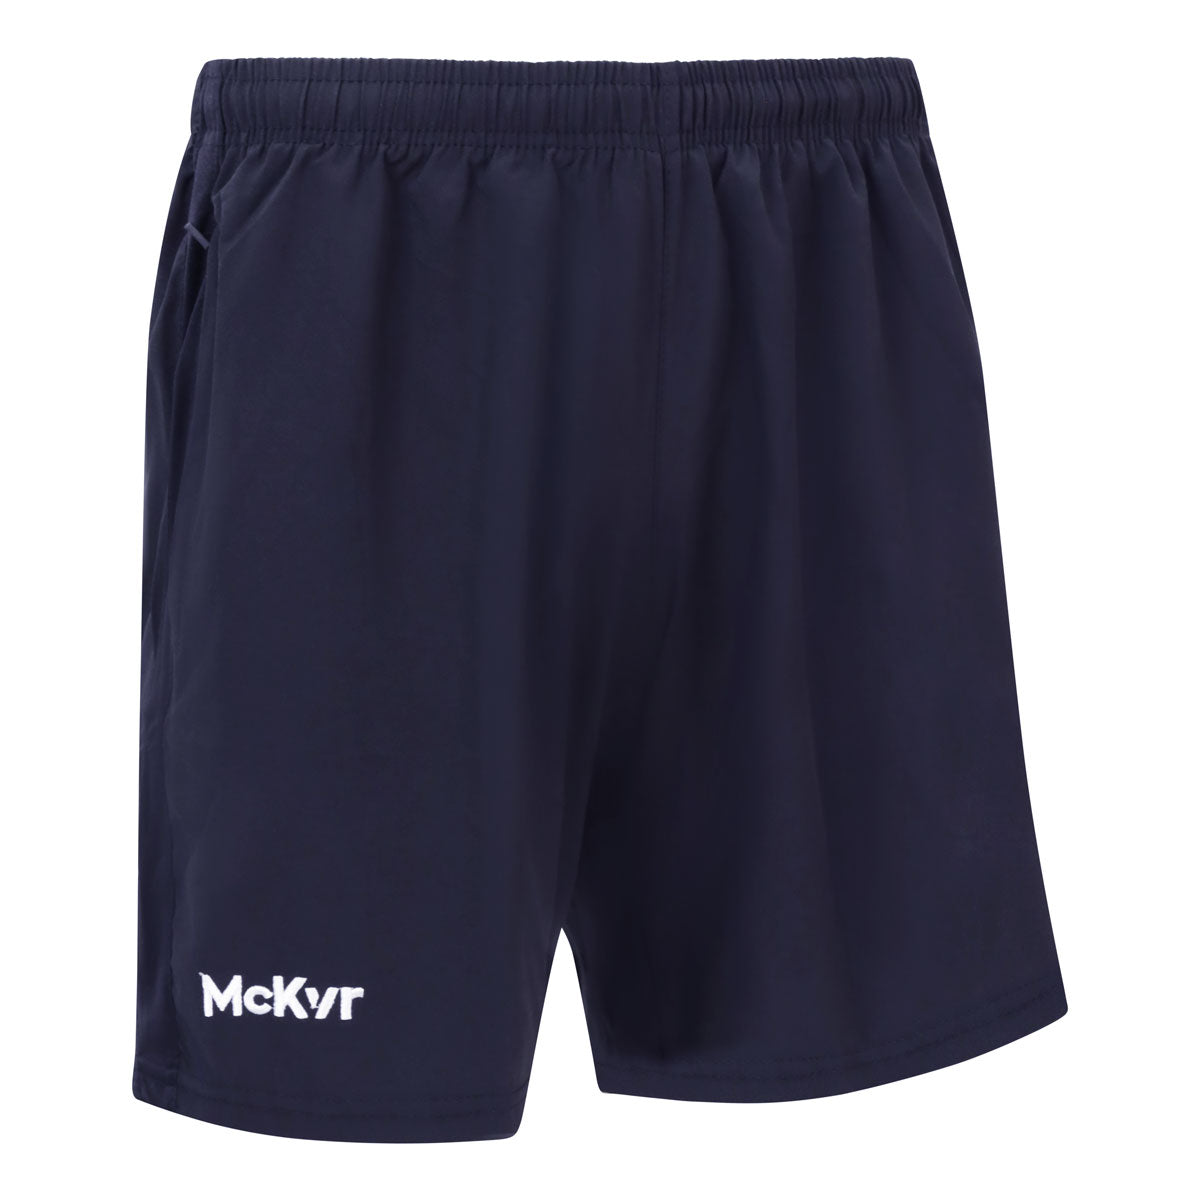 Mc Keever Core 22 Leisure Shorts - Youth - Navy